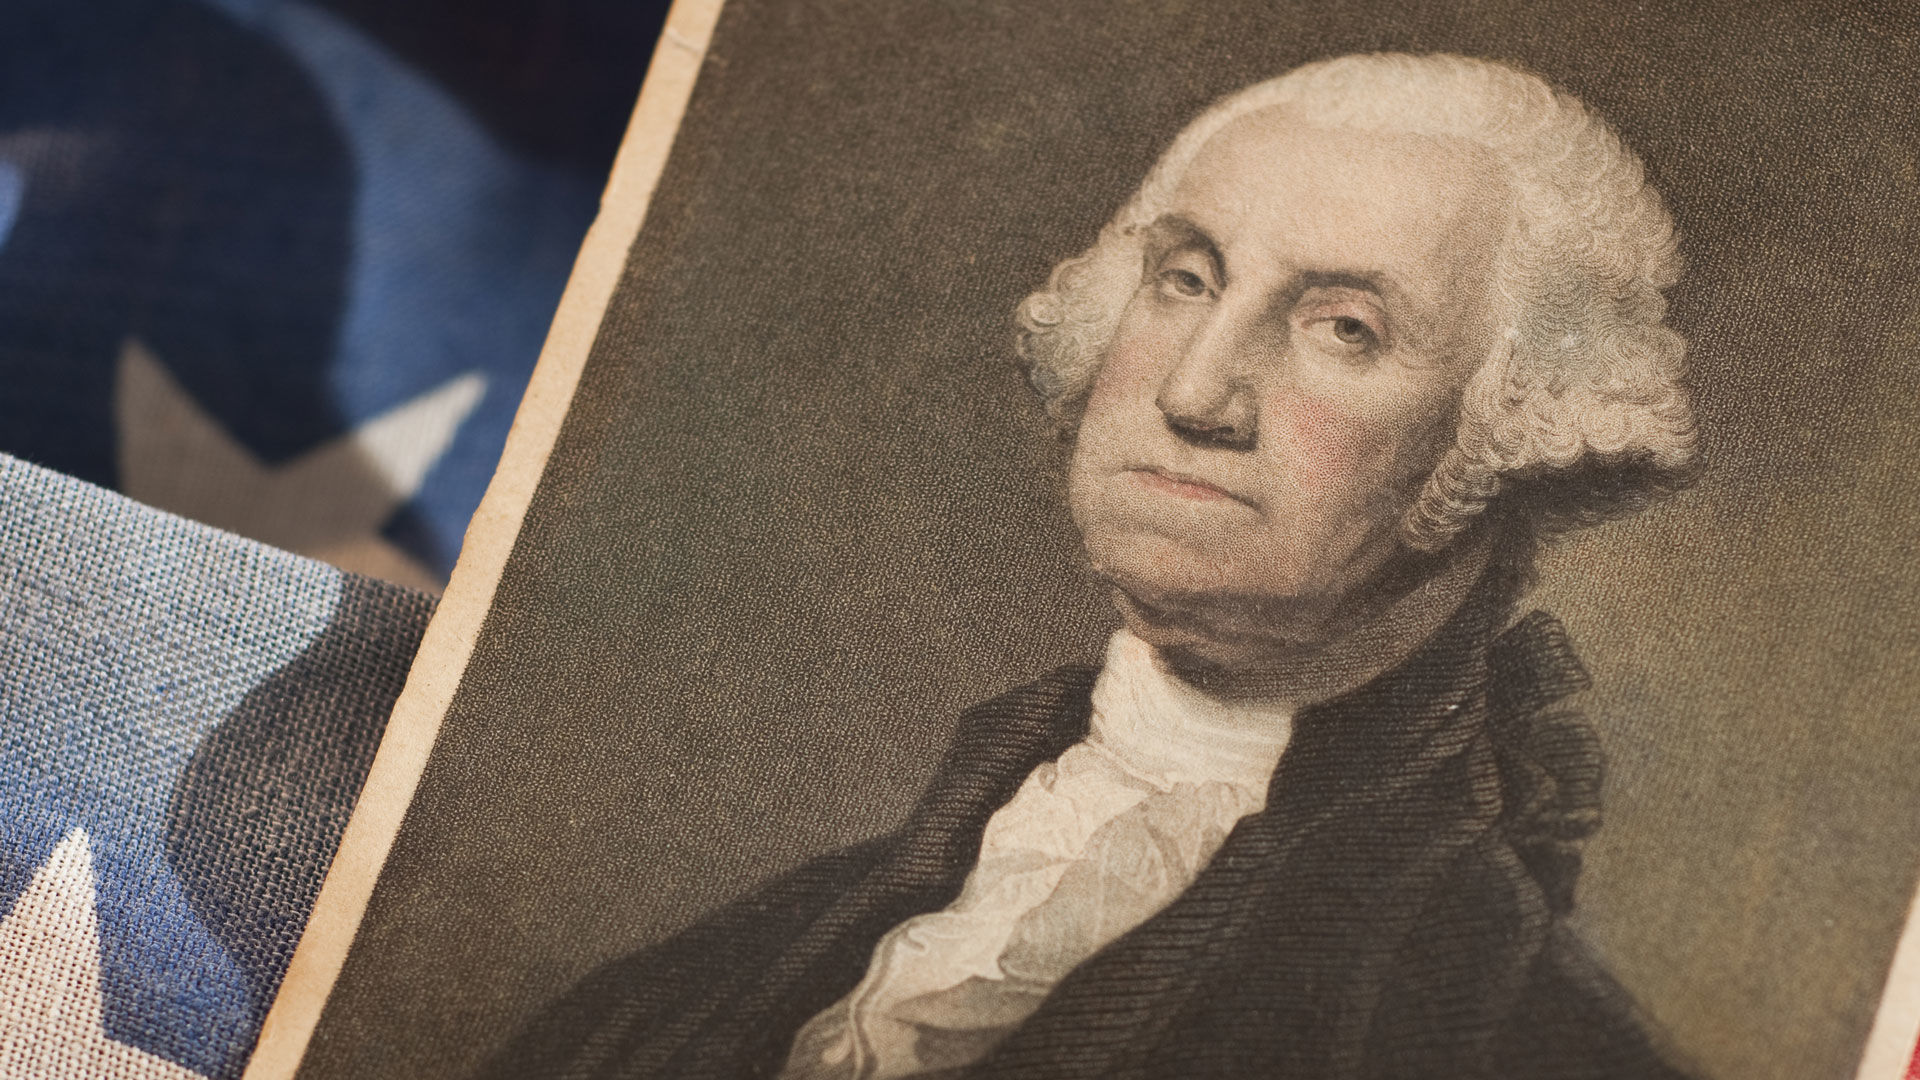 Read More: 5 Myths About George Washington, Debunked